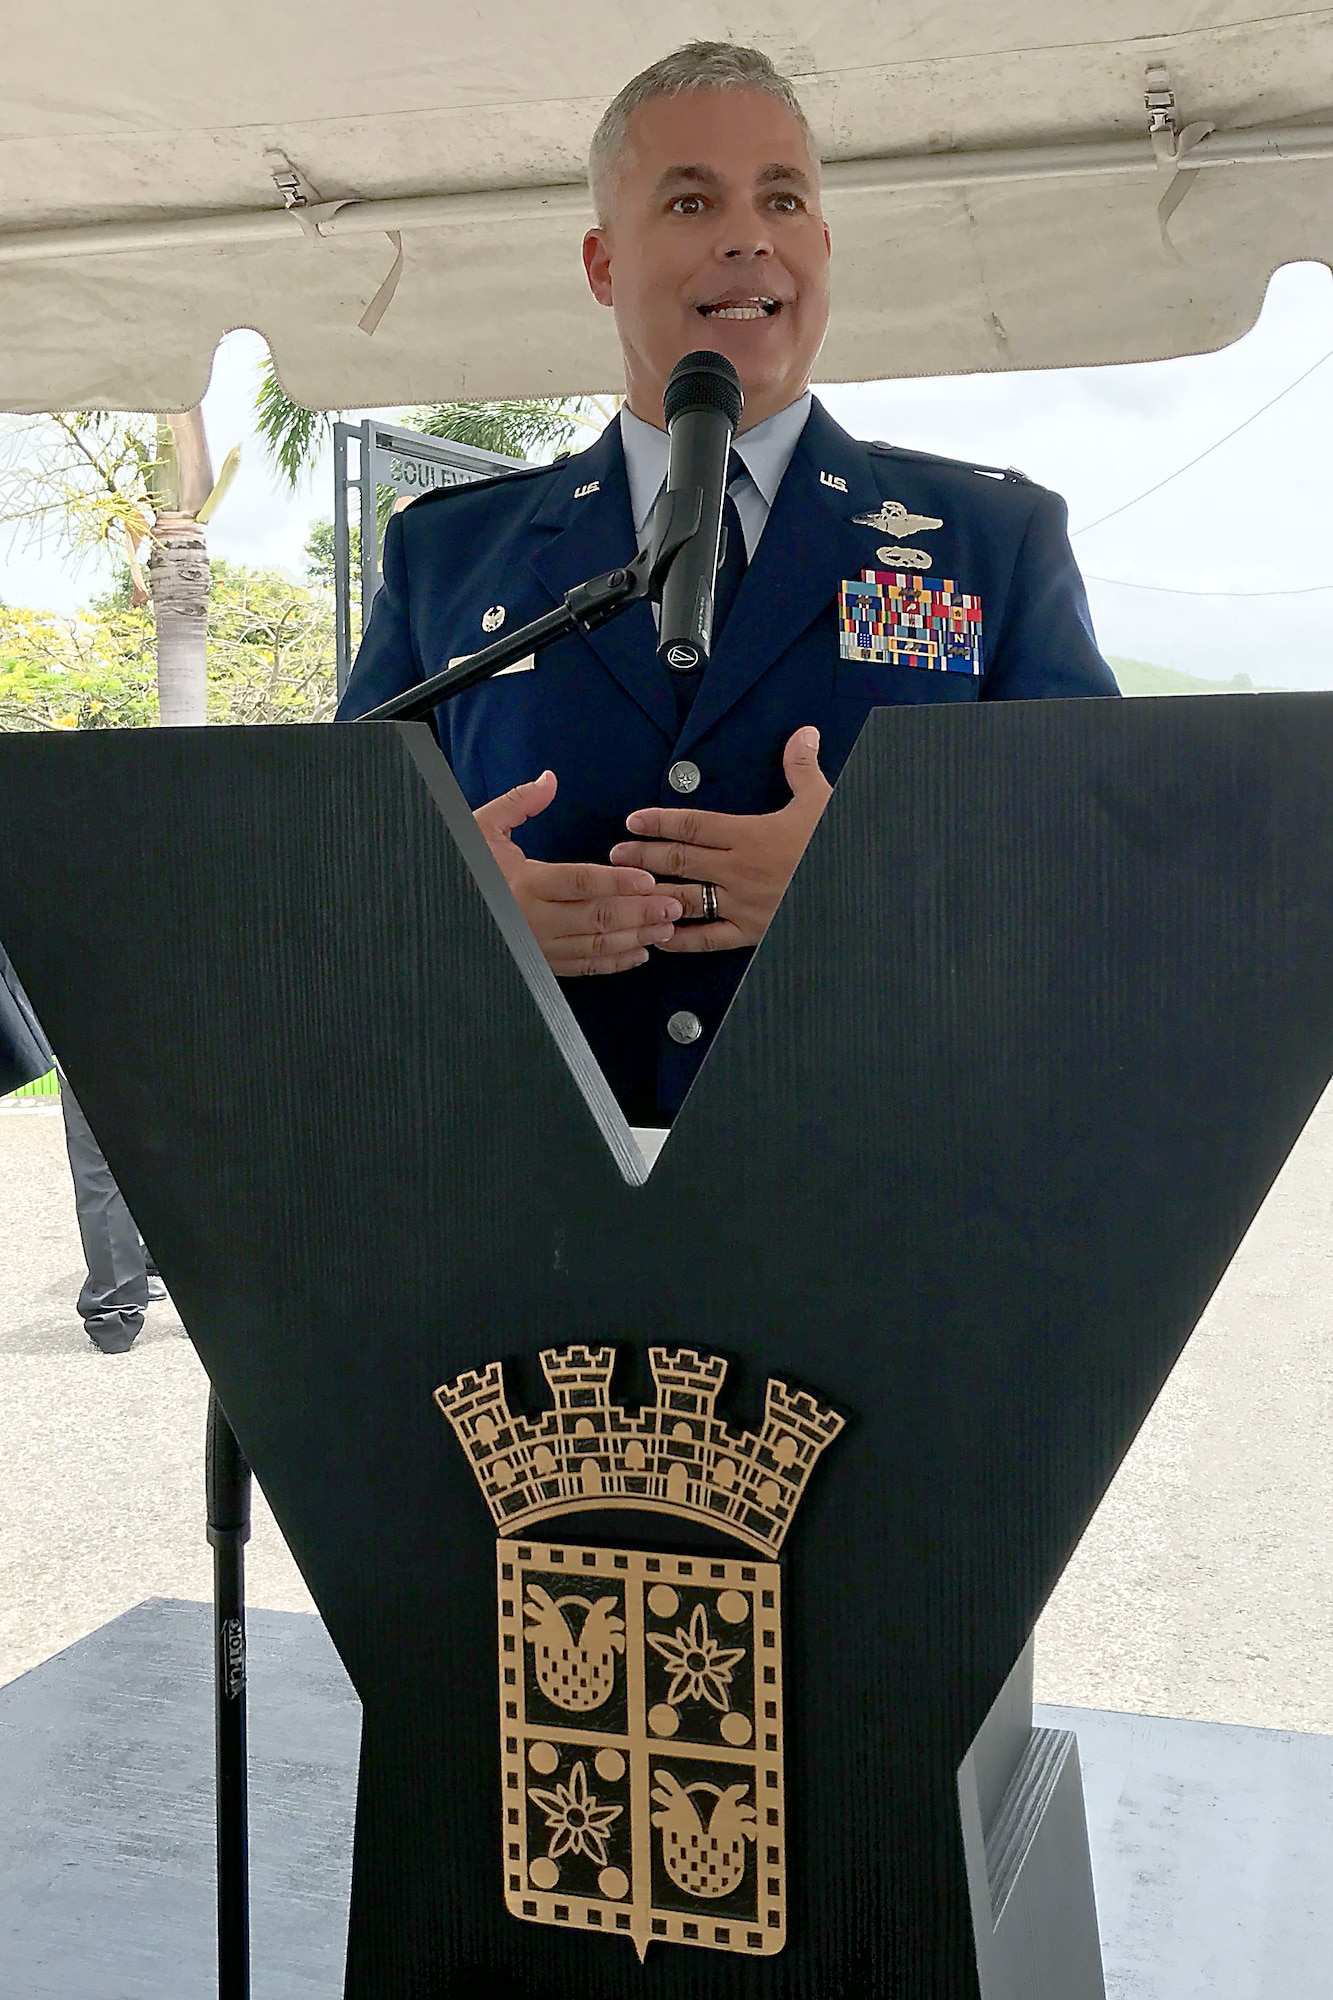 U.S. Col. Raymond Figueroa, 156th Airlift Wing commander, renders honor to Brig. Gen. Mihiel Gilormini during Brig. Gen. Mihiel Gilormini's posthumous street naming ceremony held in Yauco, Puerto Rico, July 15. (U.S. Air National Guard photo by Staff Sgt. Mizraim Gonzalez/Released)